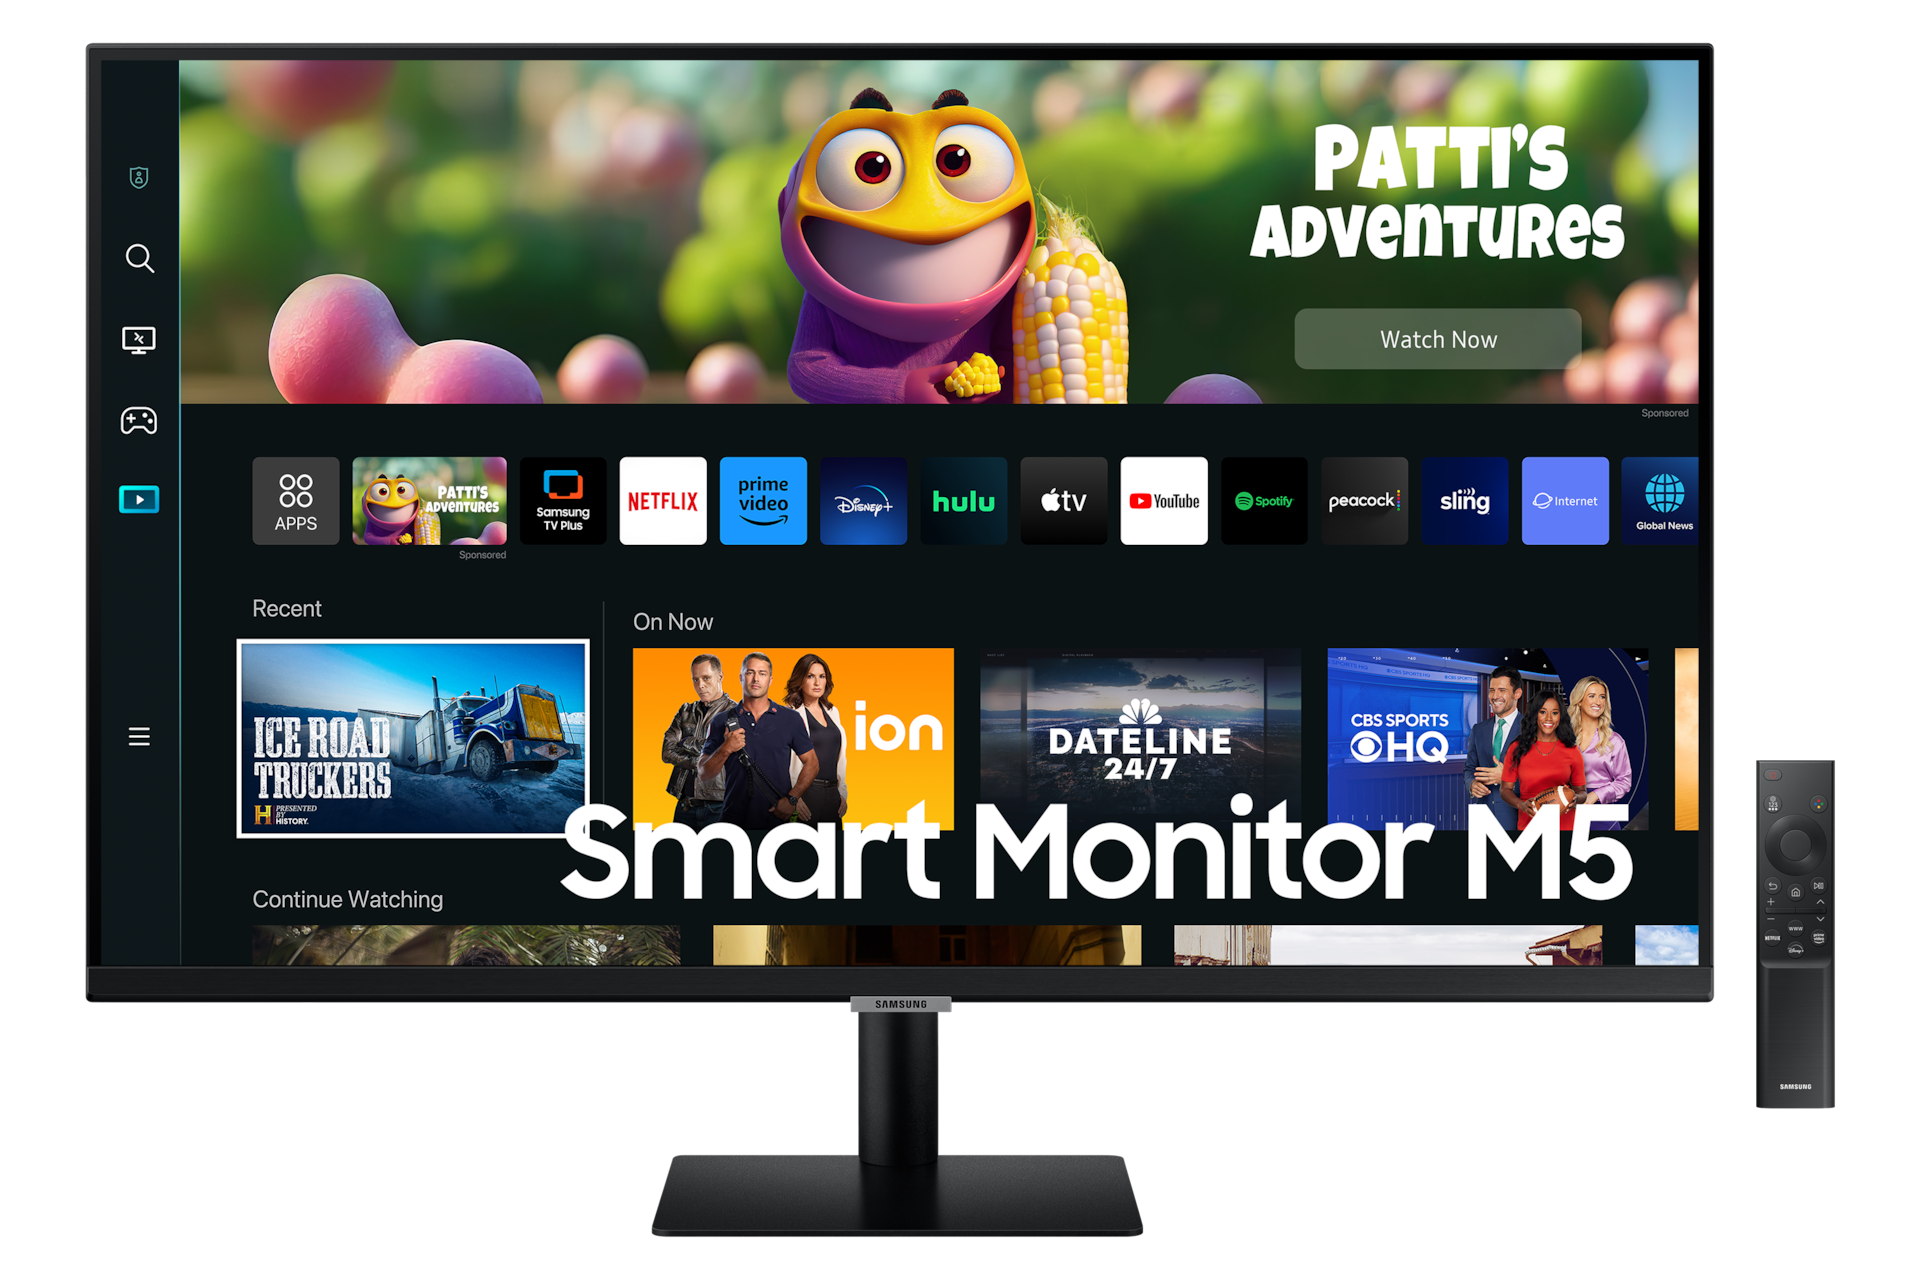 Front of the Samsung M5 LS32CM500EEXXS Smart monitor & TV in Black Colour